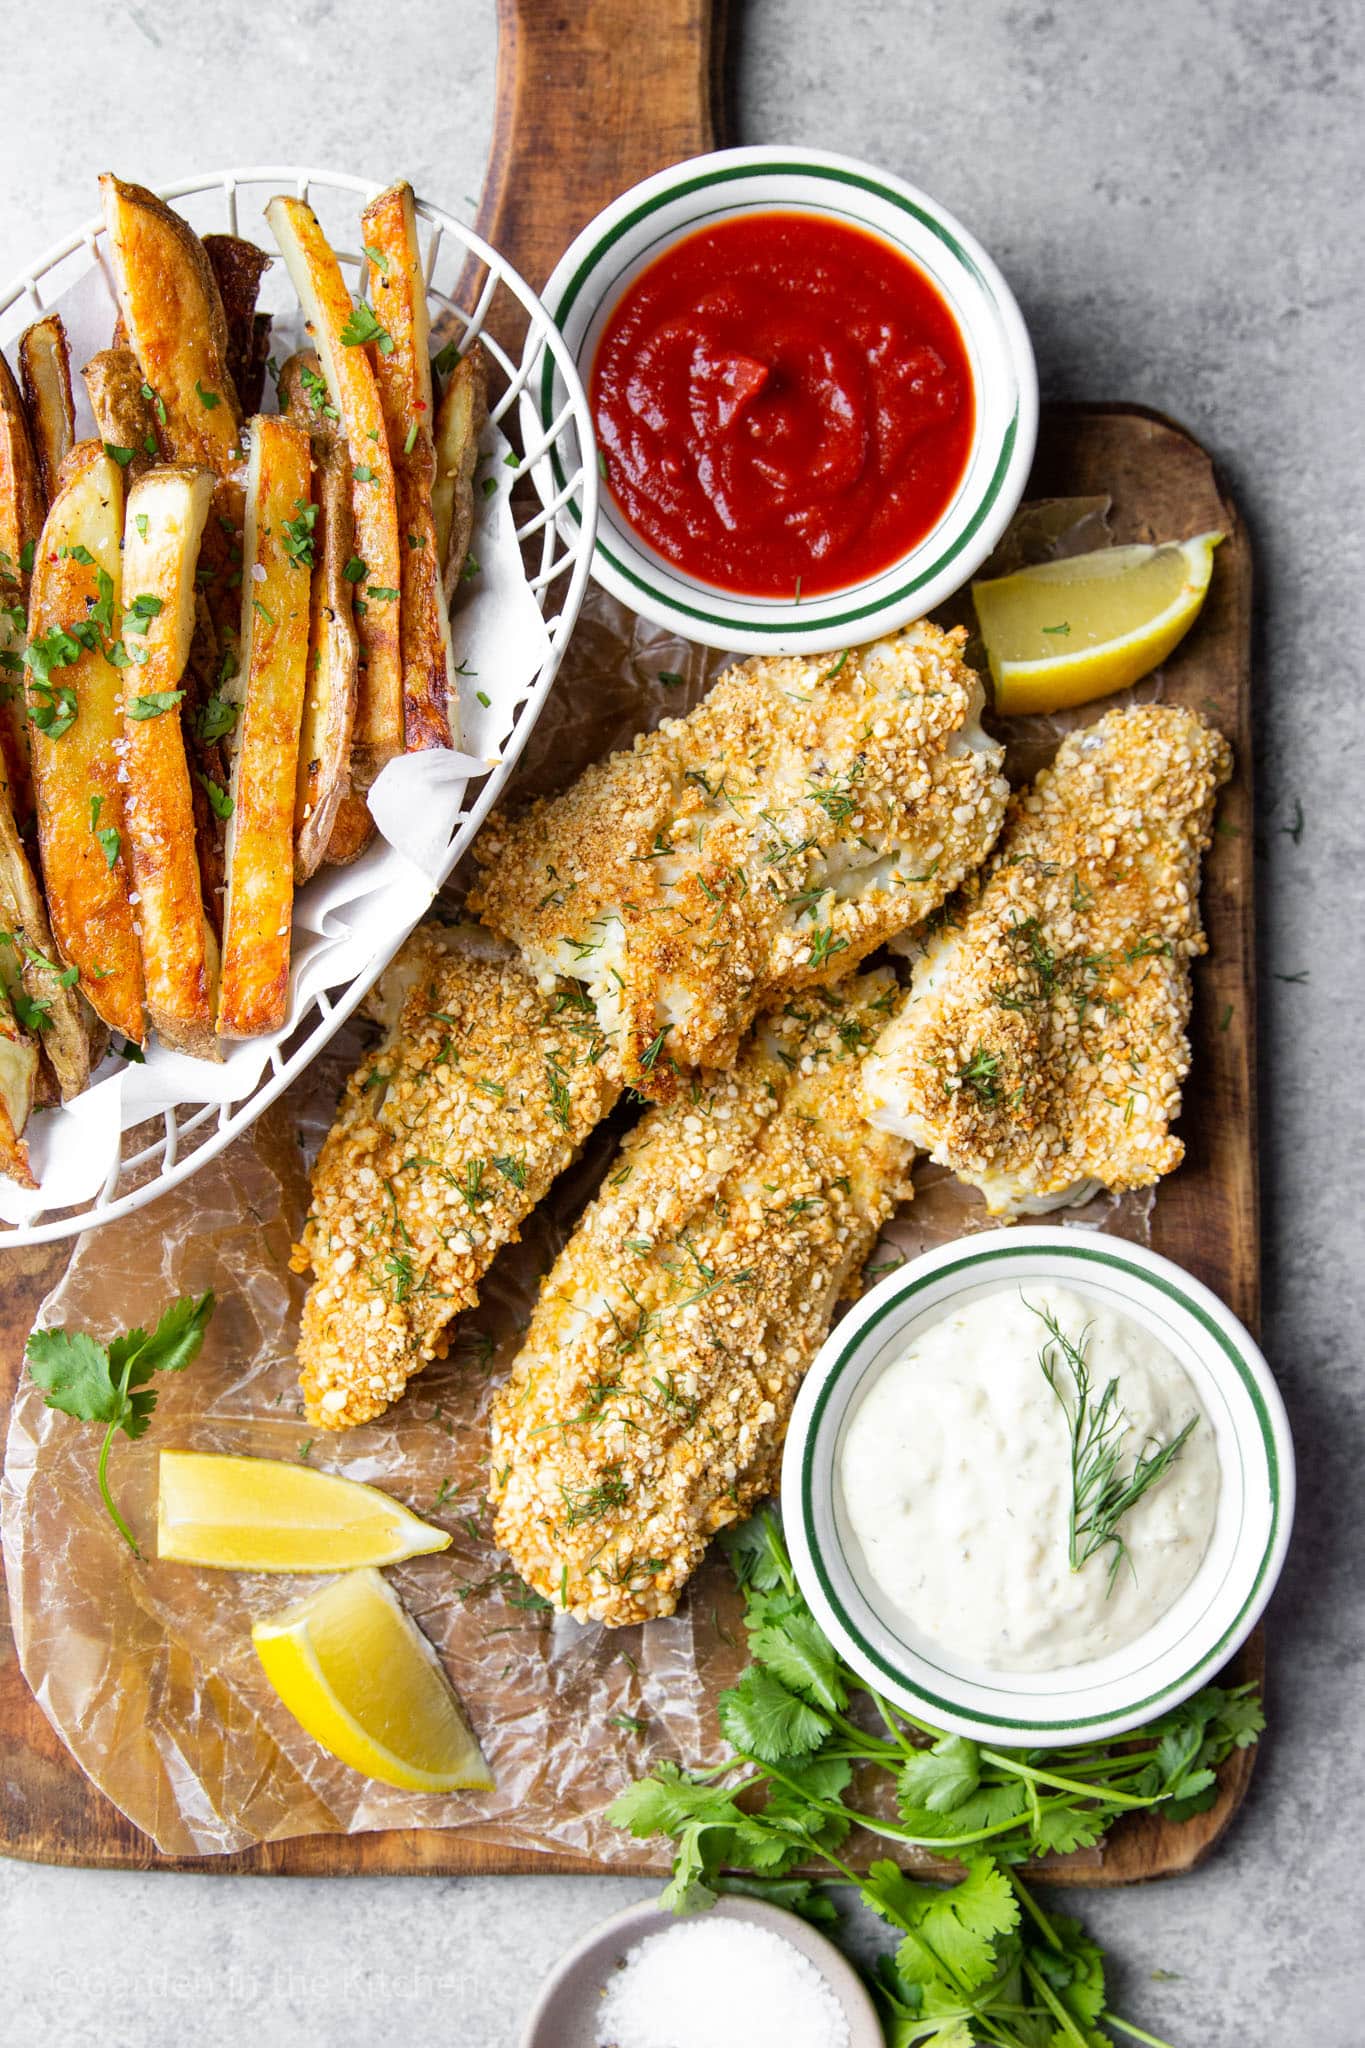 baked panko-coated fish filets on a wood board with small bowls of fries, ketchup, and tartar sauce on the side.